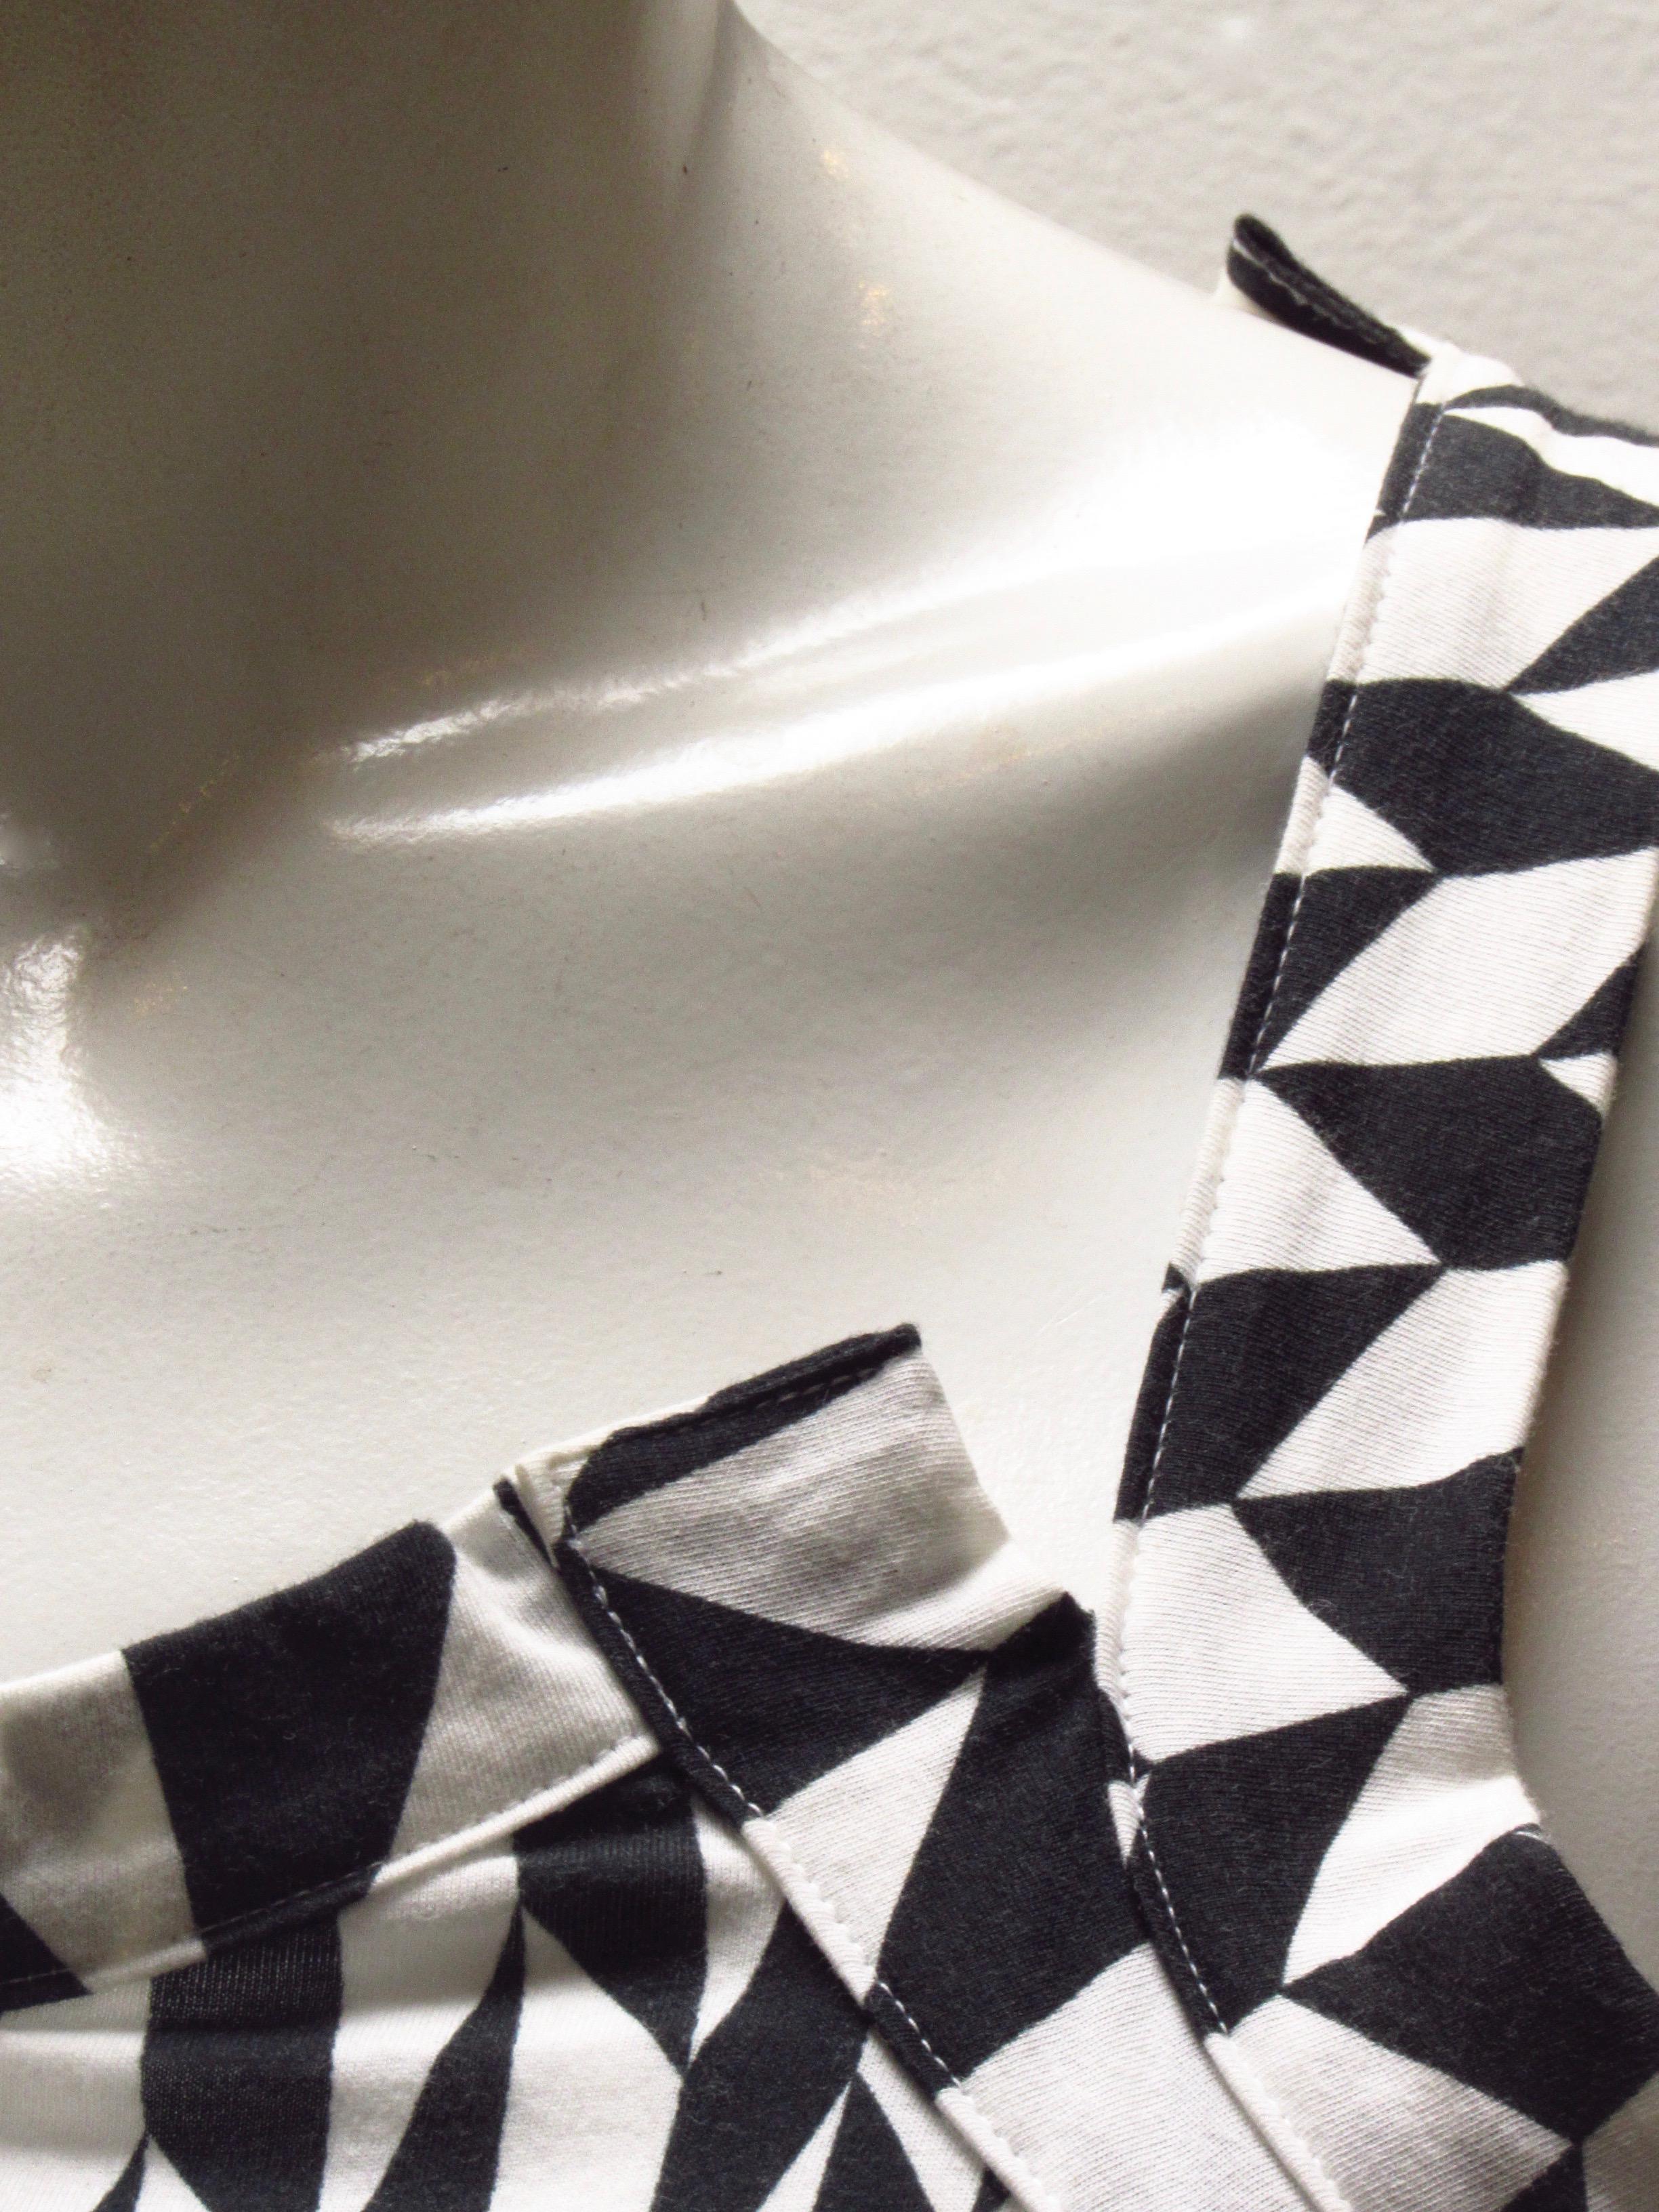 Vintage Yohji Yamamoto Y's tank top features a scoop neckline and racerback cut, both asymmetrical by design. The black and white harlequin pattern courses and changes as it flows across the 100% cotton background.